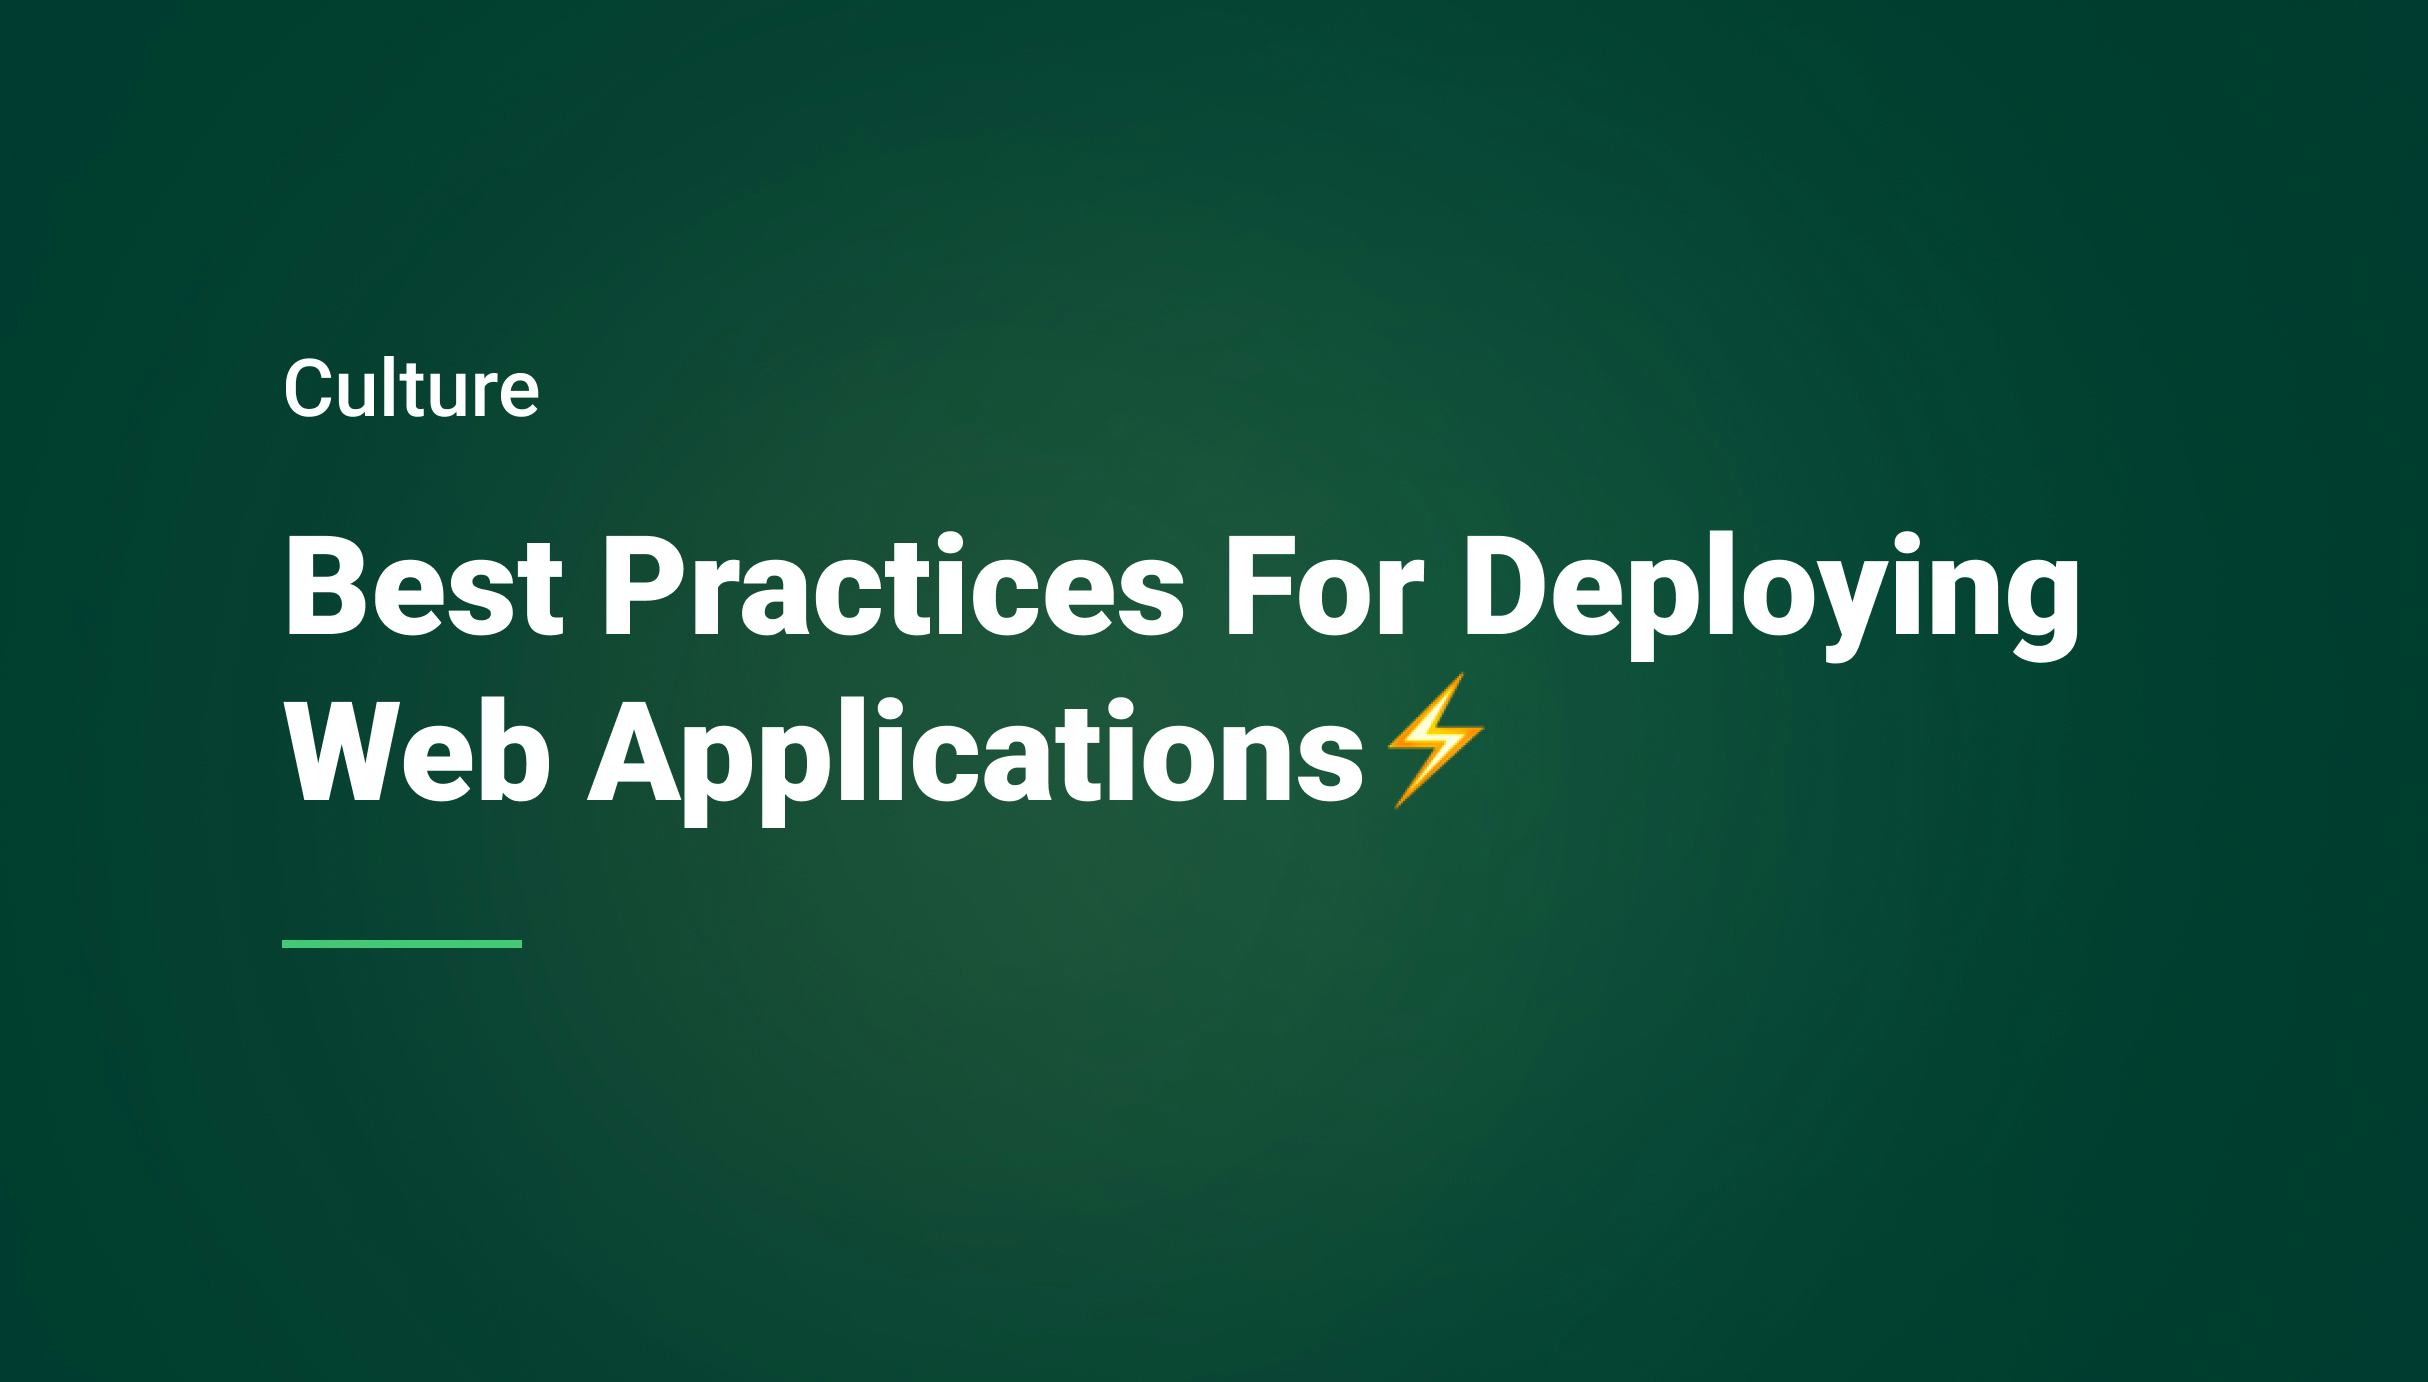 Best Practices For Deploying Web Applications  - Qovery